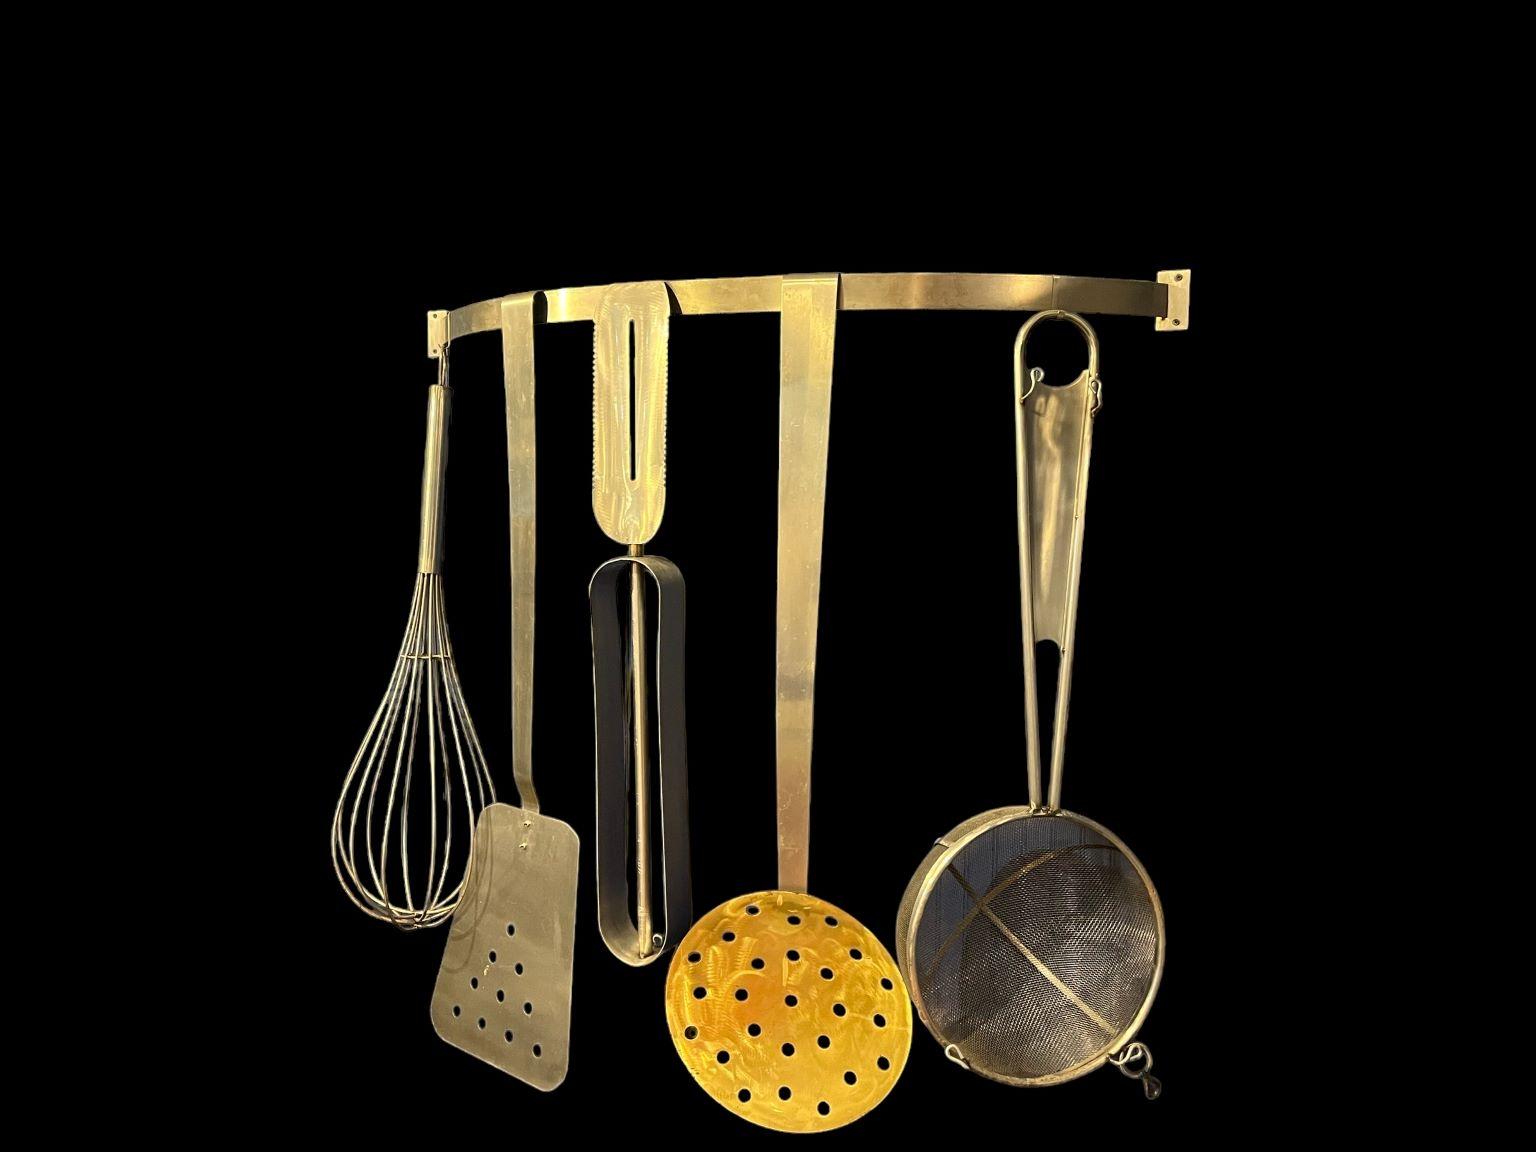 This delightfully playful set of giant cooking utensil sculptures in the style of Curtis Jere' is uncommon for its number of pieces. It includes a peeler, a spatula, a colander, a strainer and a large whisk as well as a custom wall bracket. They are